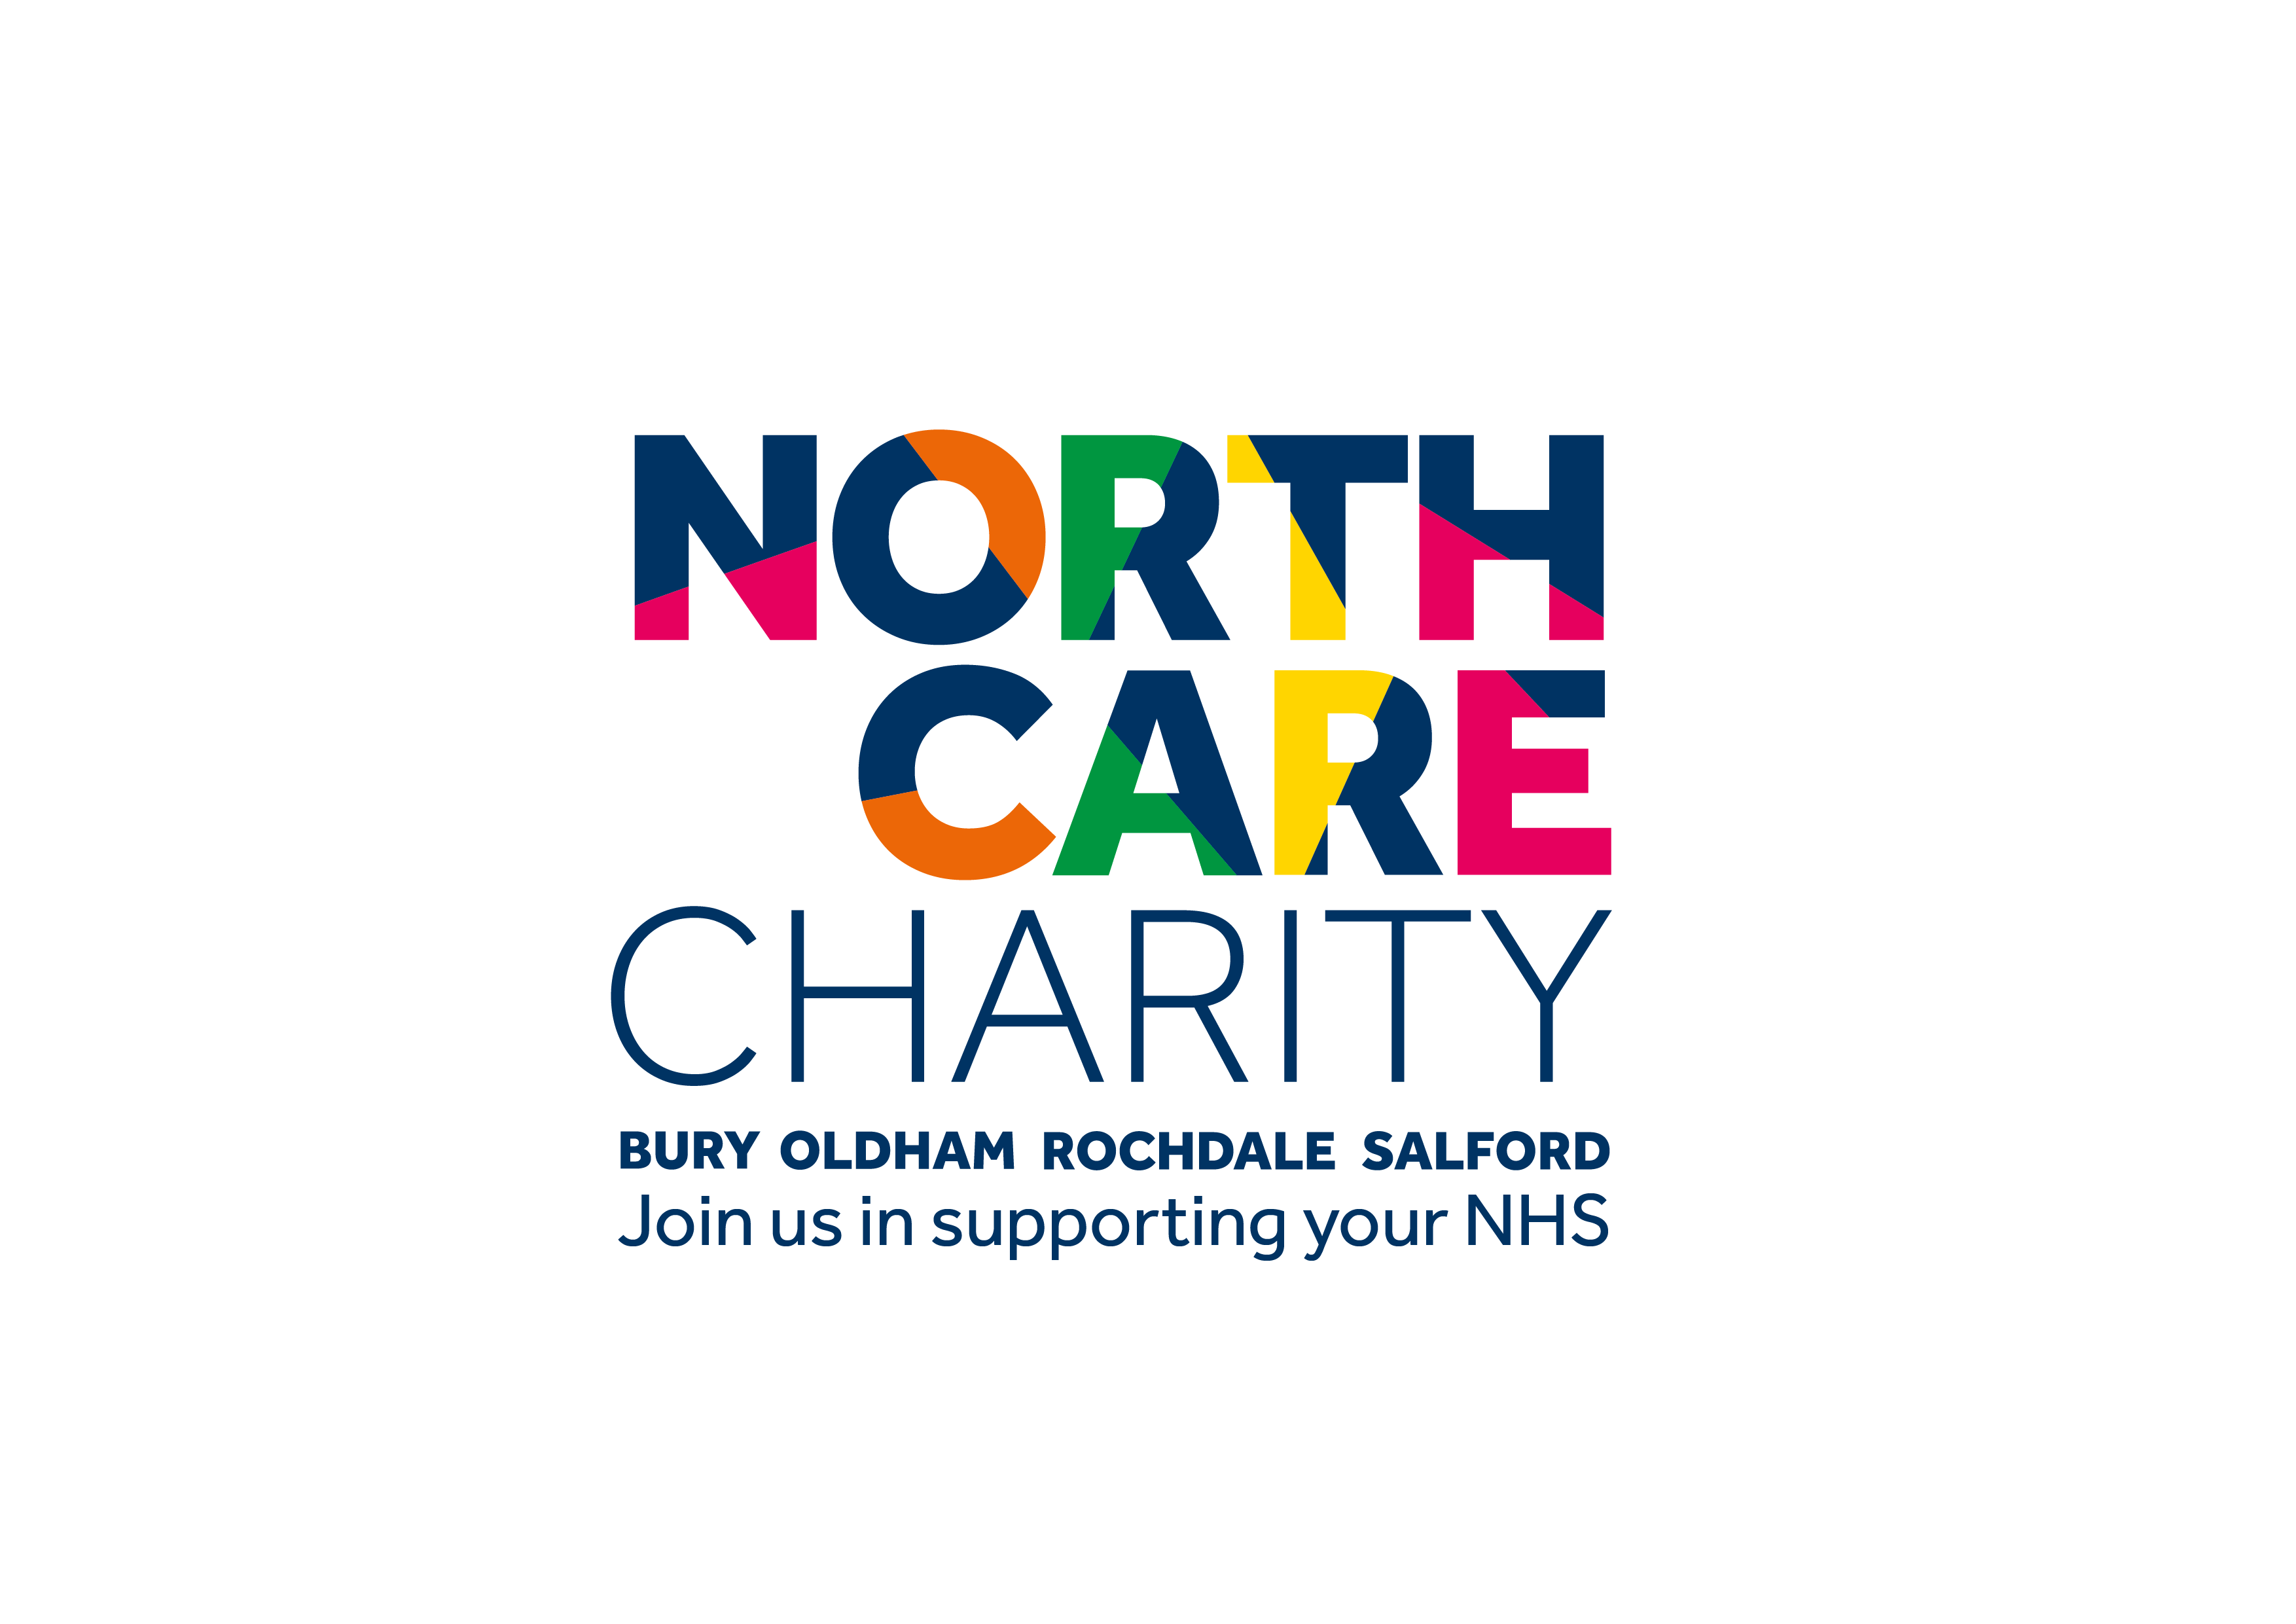 NorthCare Charity